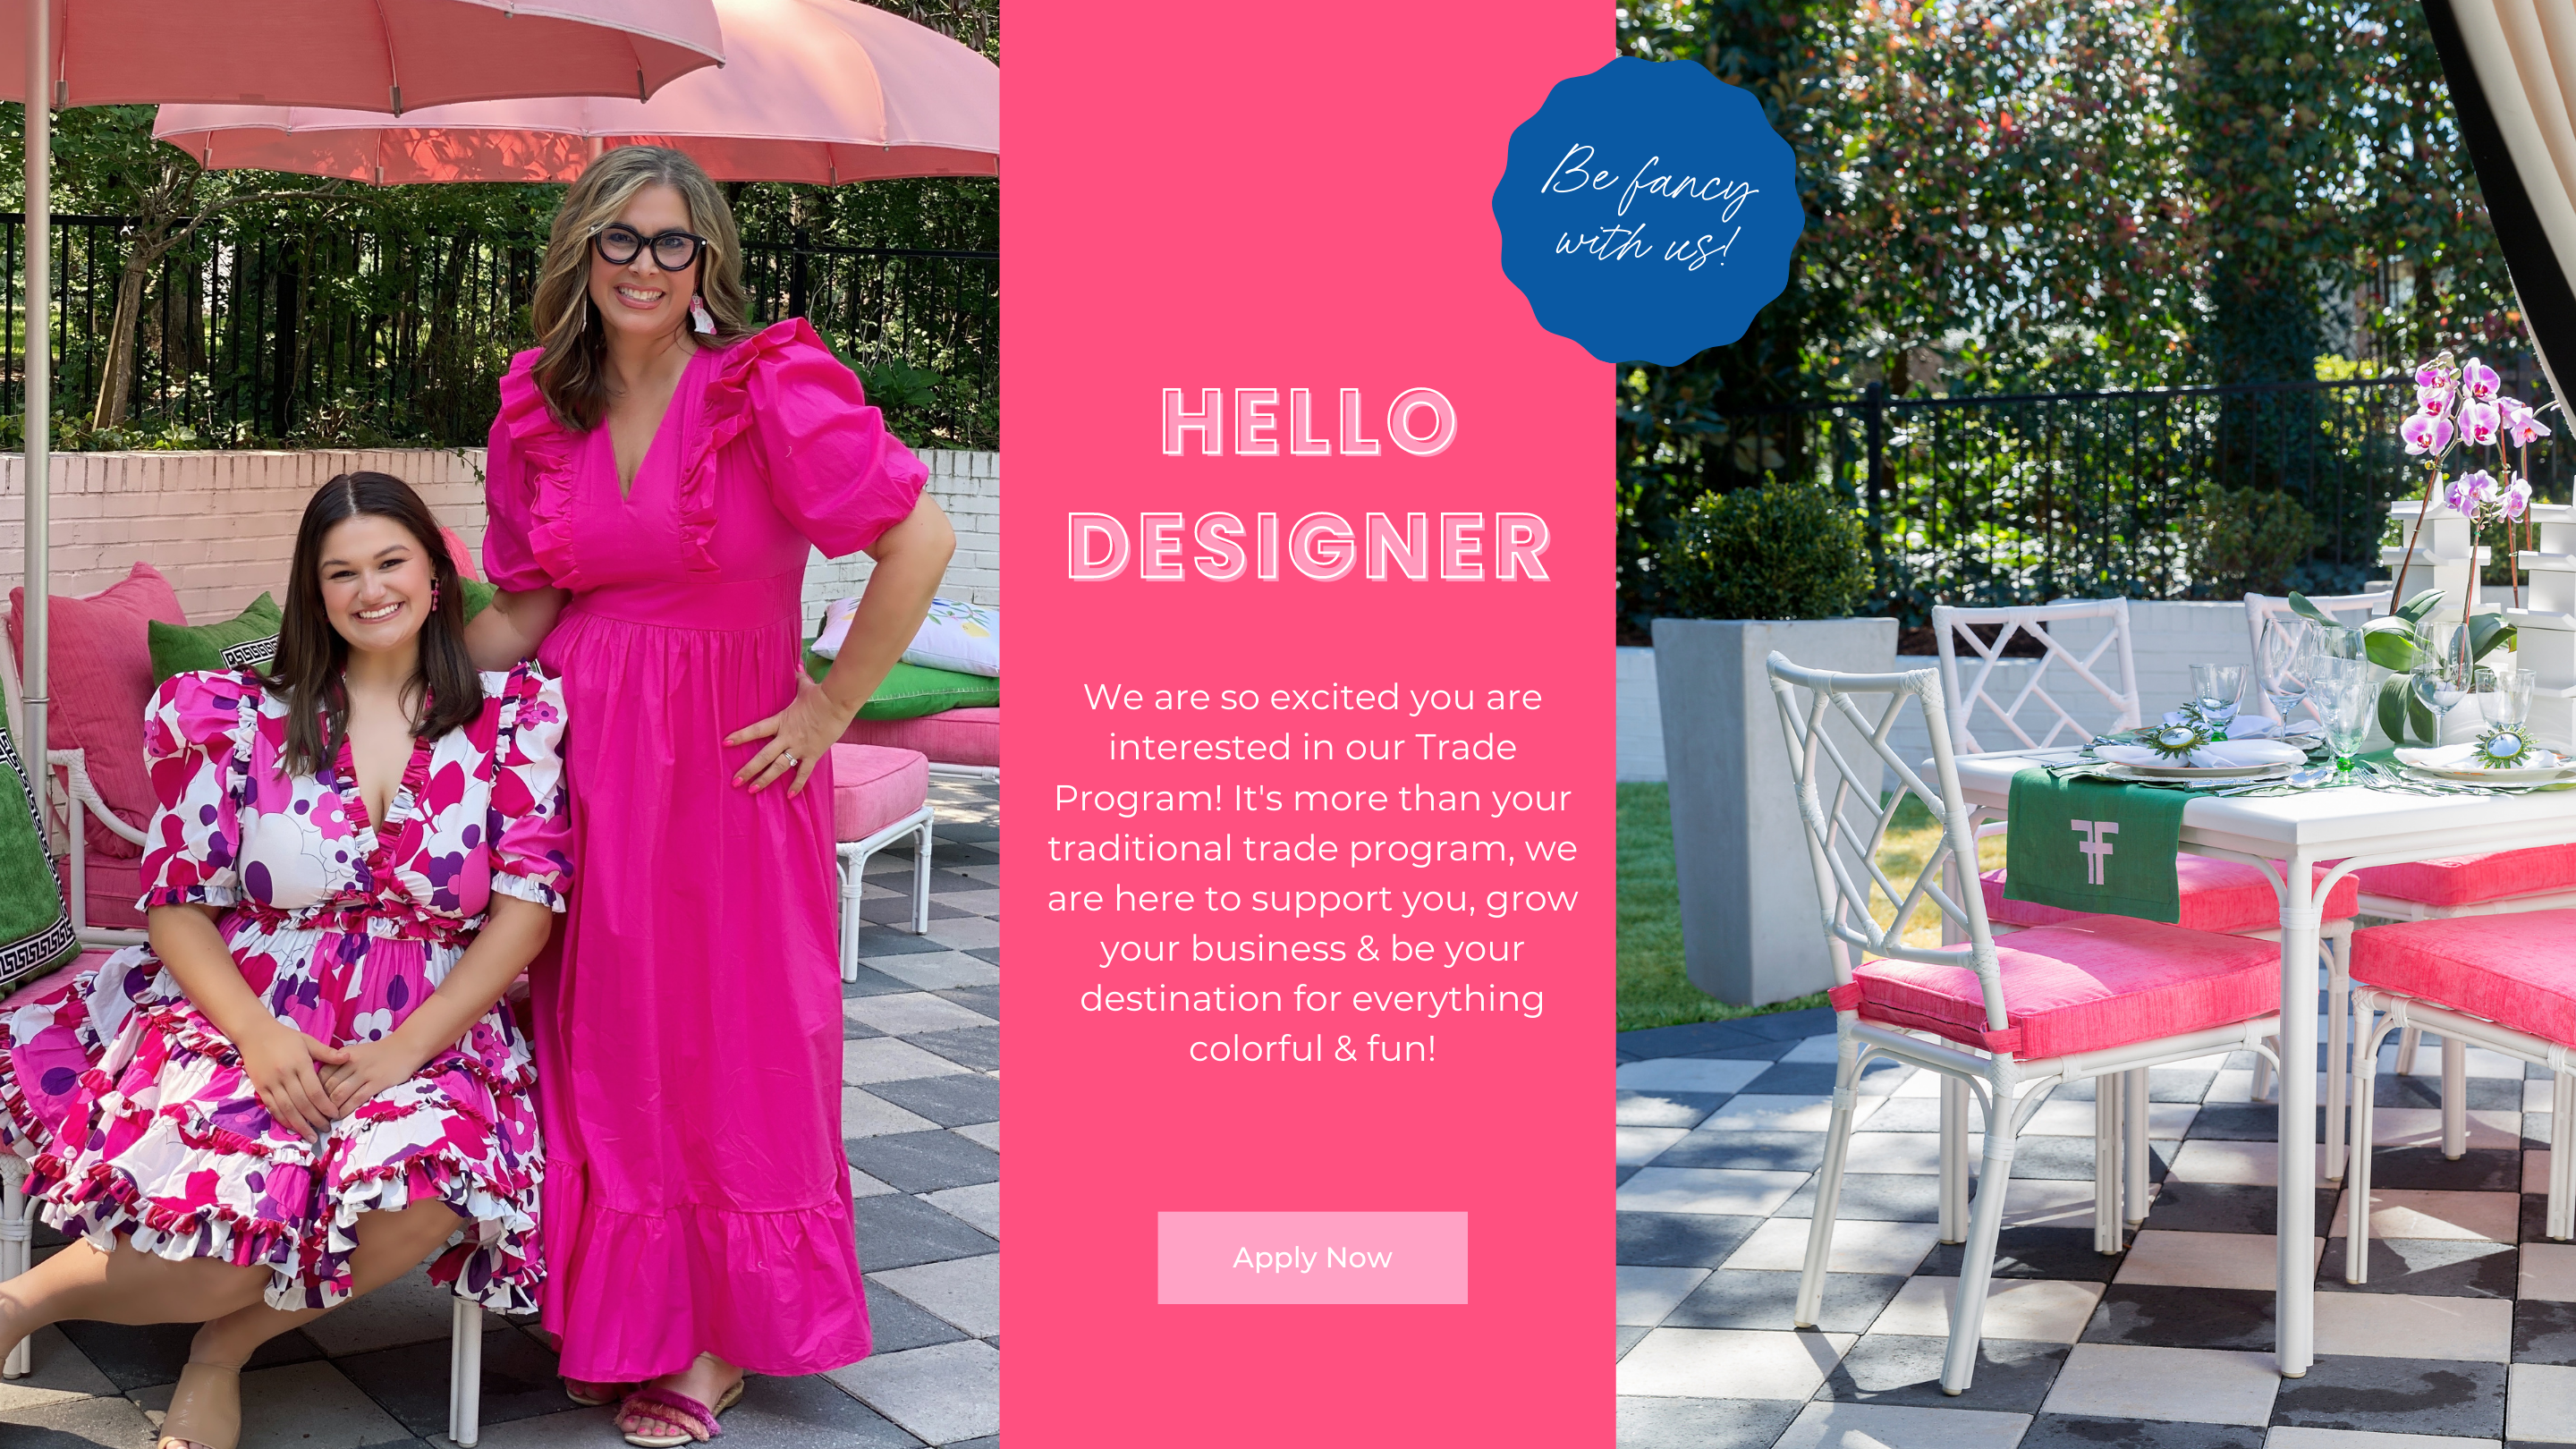 Hello Designer - We are so excited you are interested in our Trade Program! It's more than your traditional trade program, we are here to support you, grow your business & be your destination for everything colorful & fun!